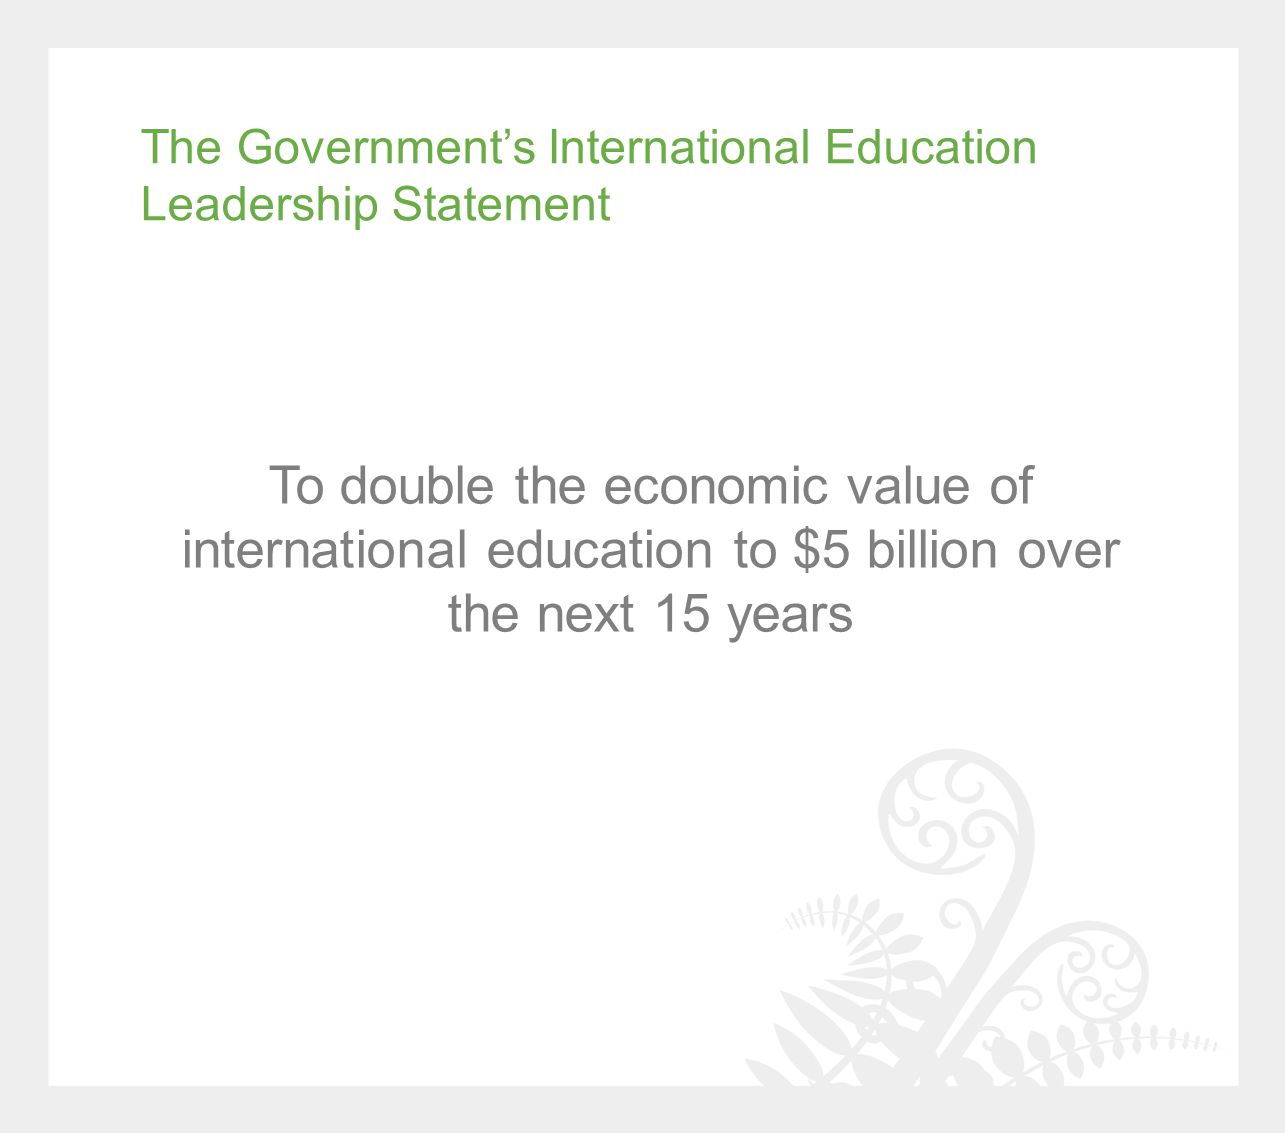 The Government’s International Education Leadership Statement To double the economic value of international education to $5 billion over the next 15 years